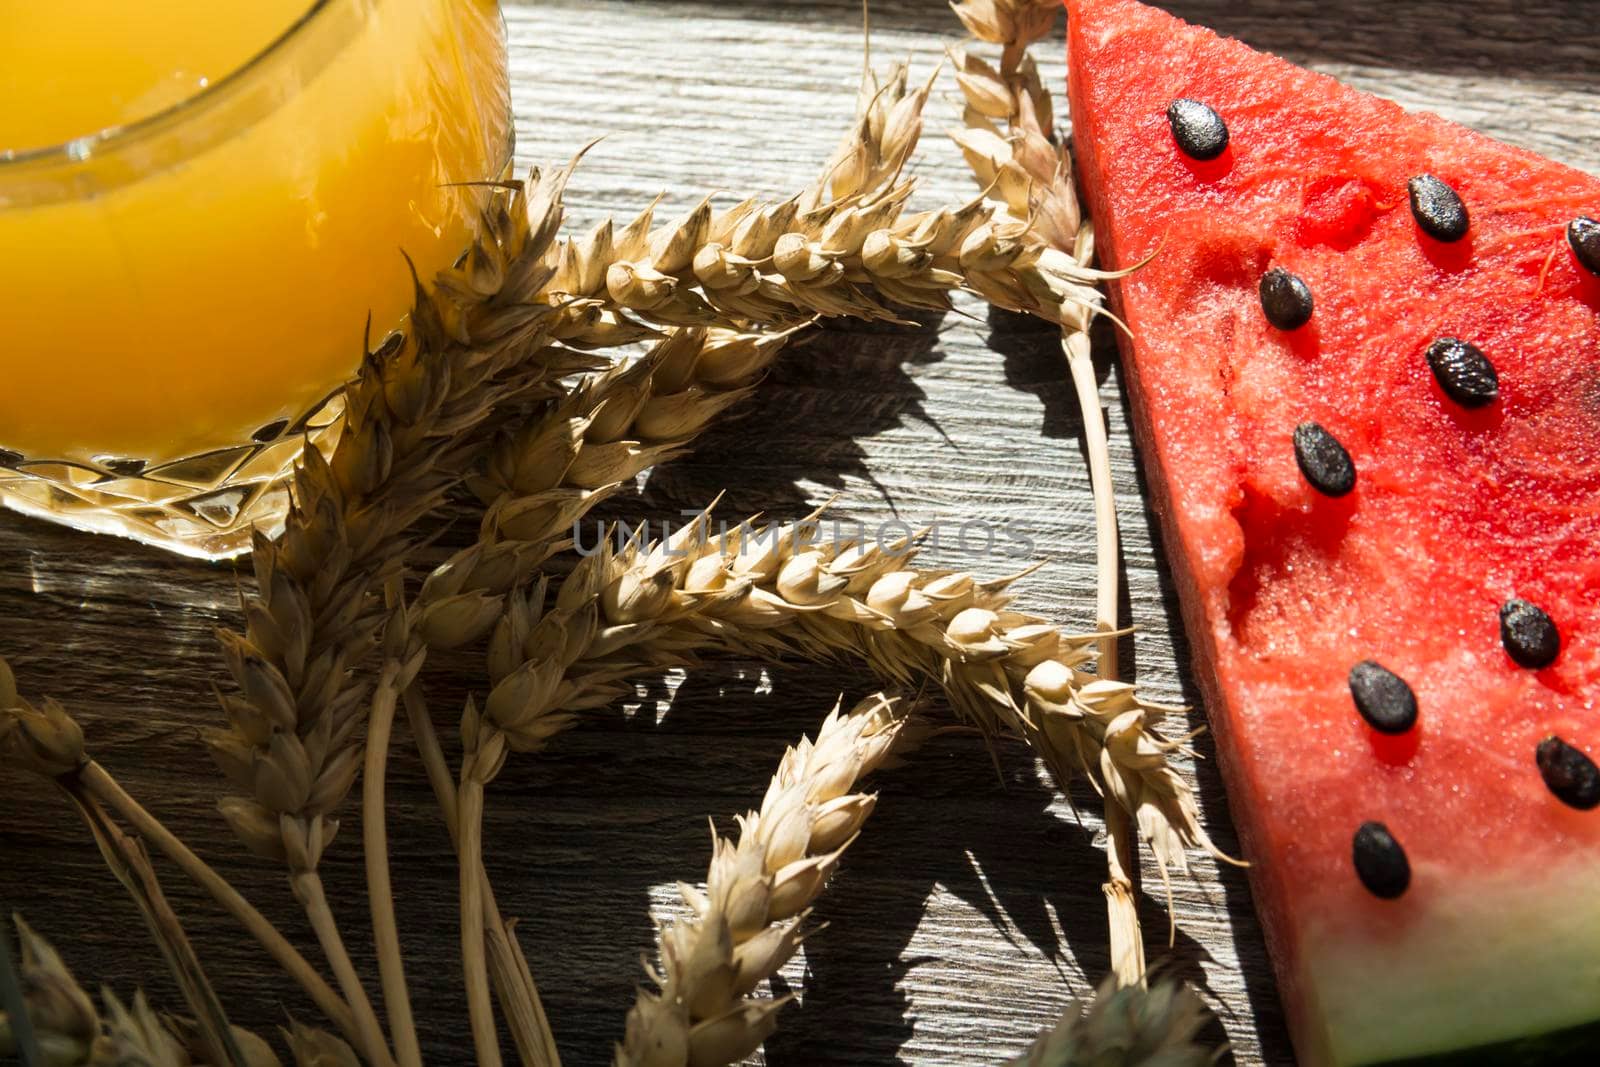 Freshly squeezed orange juice, sweet watermelon dessert and spikelets of ripe wheat on a wooden table in the sunlight...